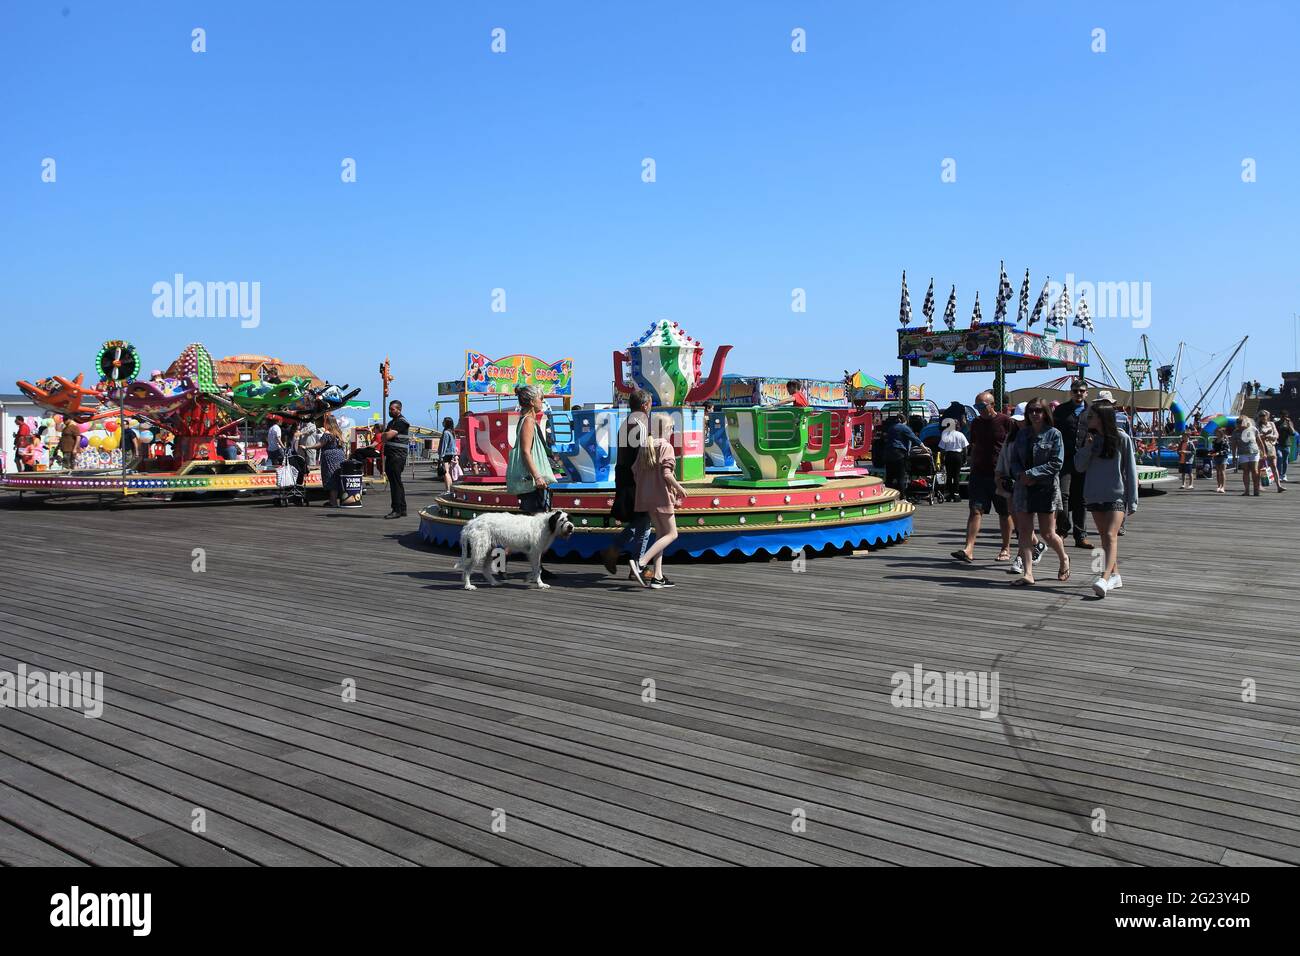 People enjoying a sunny day on Hastings Pier, Hastings, East Sussex, UK Stock Photo